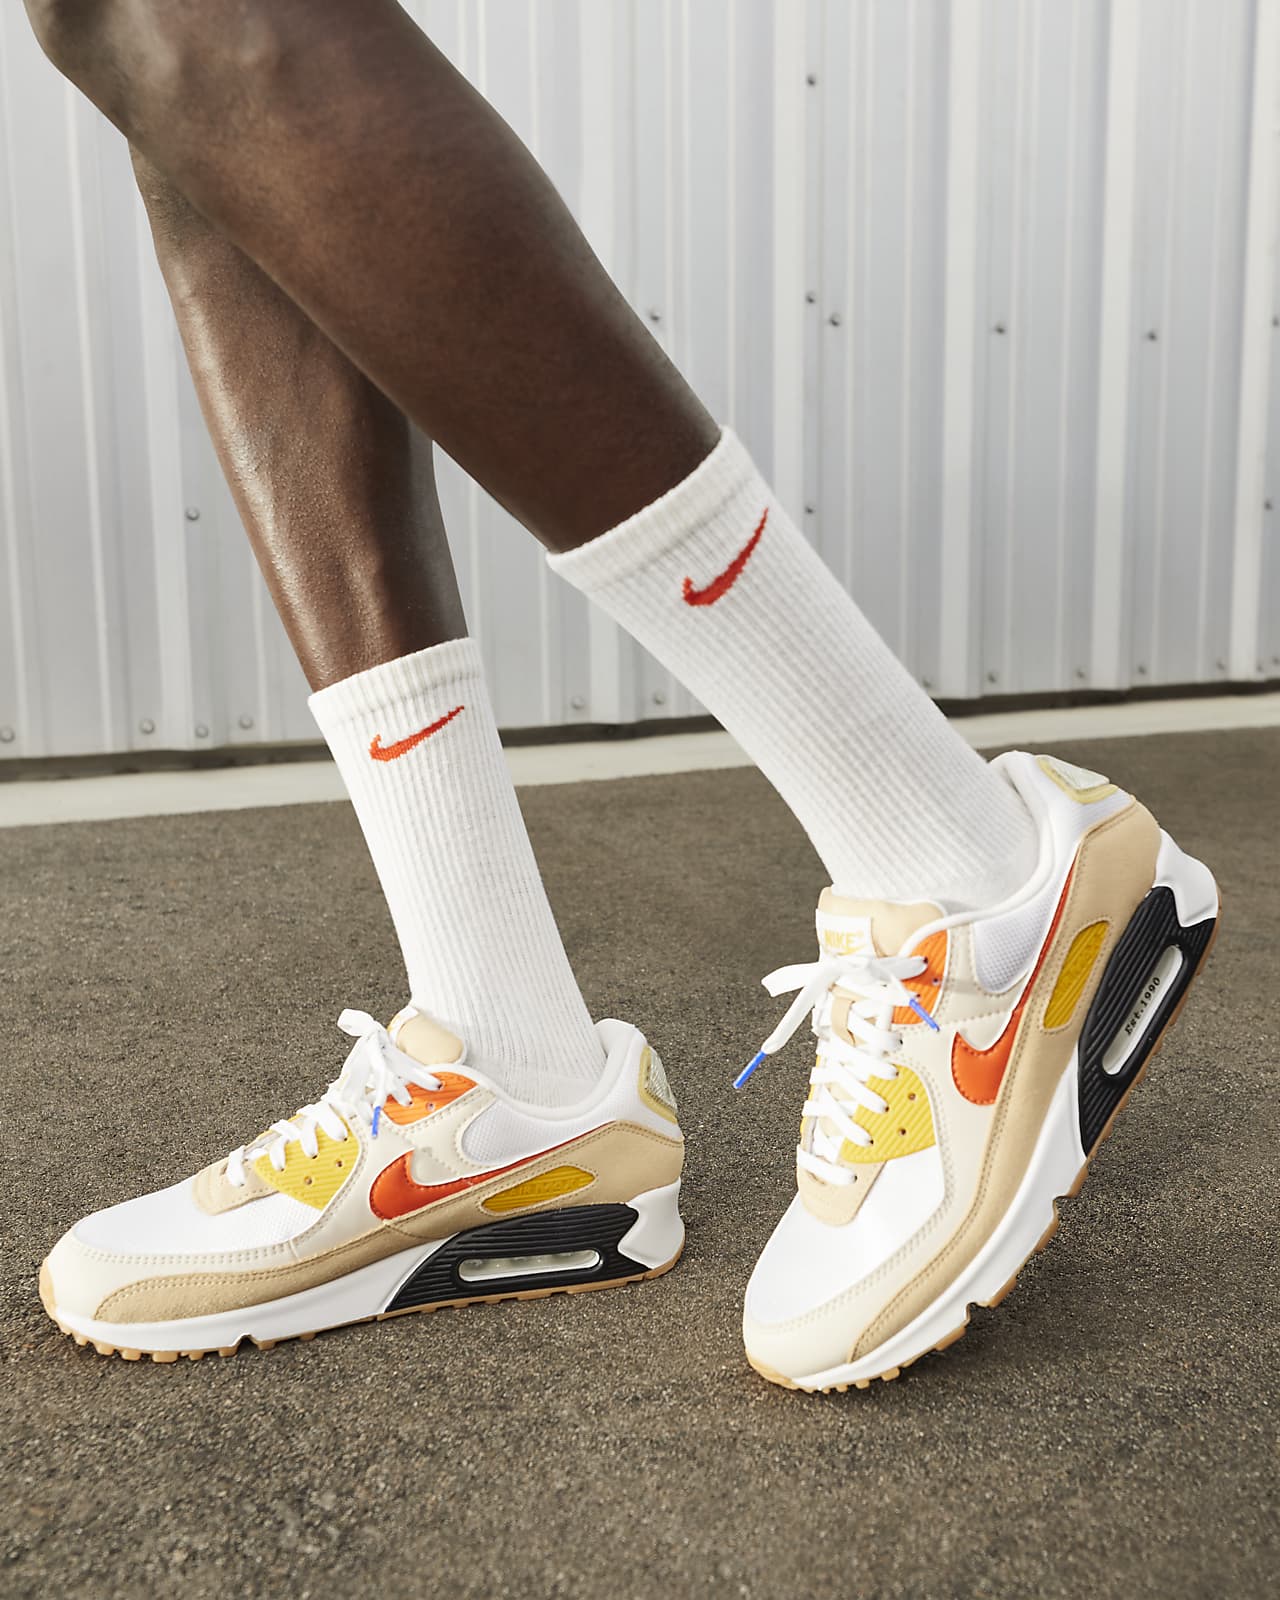 Off-White x Nike Air Max 90 The Ten: Review & On-Feet 